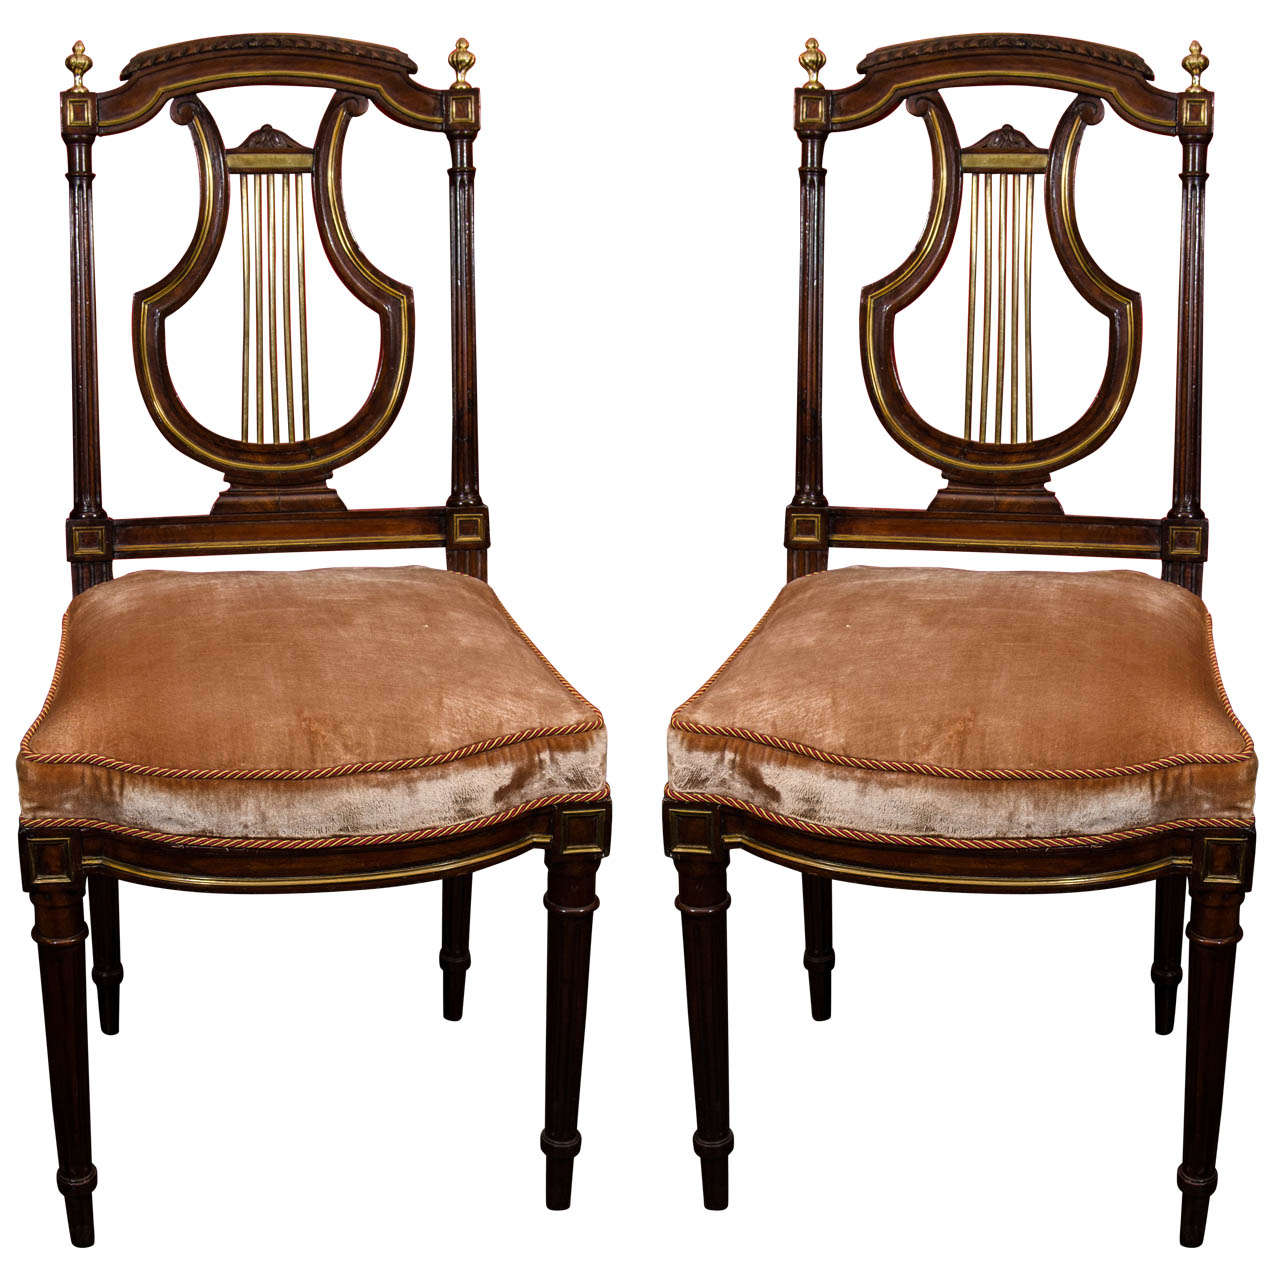 Pair of French Louis XVI Lyre-Back Side Chairs